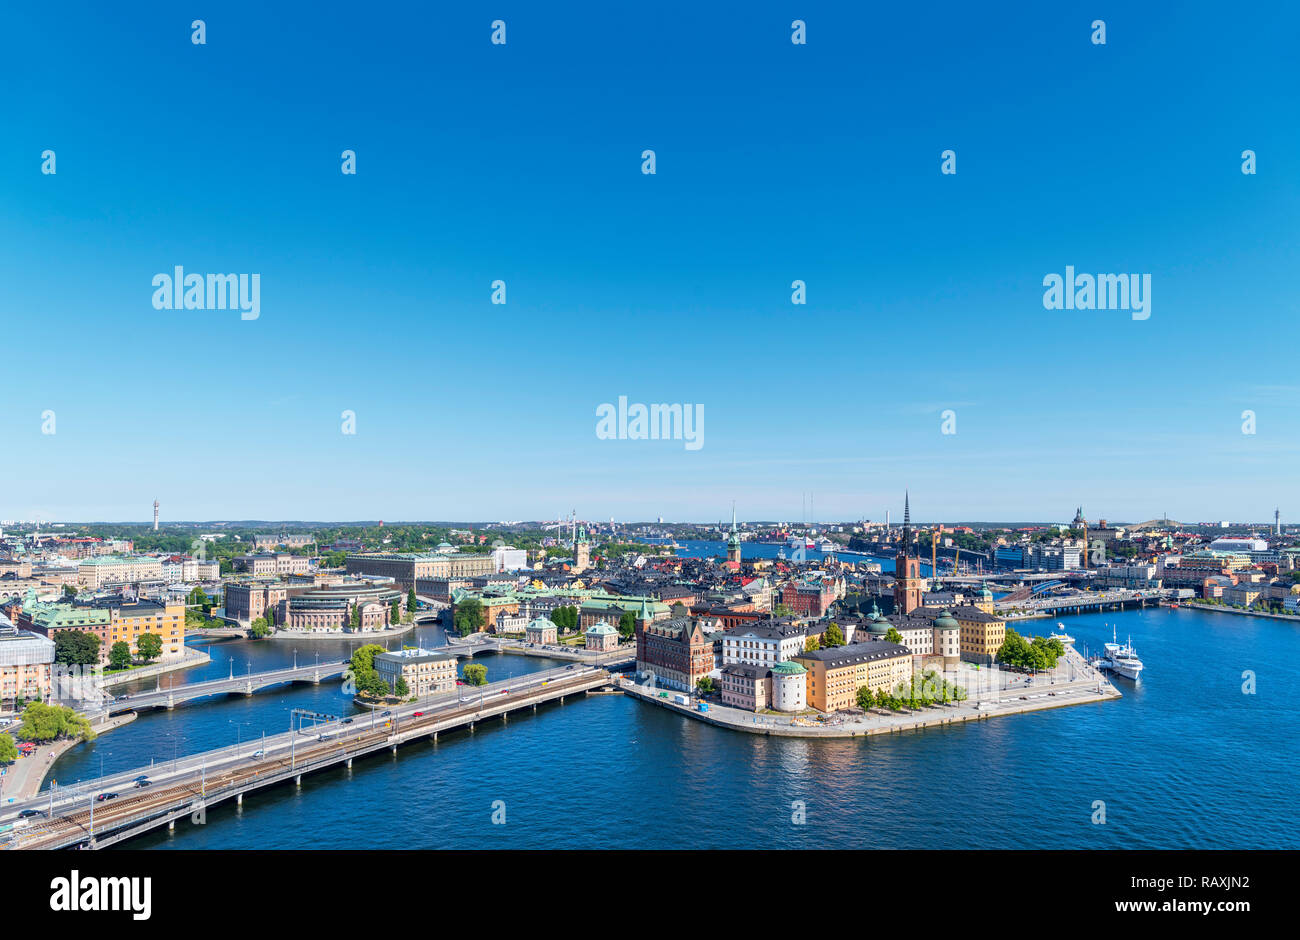 Aerial view of Riddarholmen and Gamla Stan (Old Town) from the Tower of Stockholm City Hall (Stadshuset), Kungsholmen, Stockholm, Sweden Stock Photo